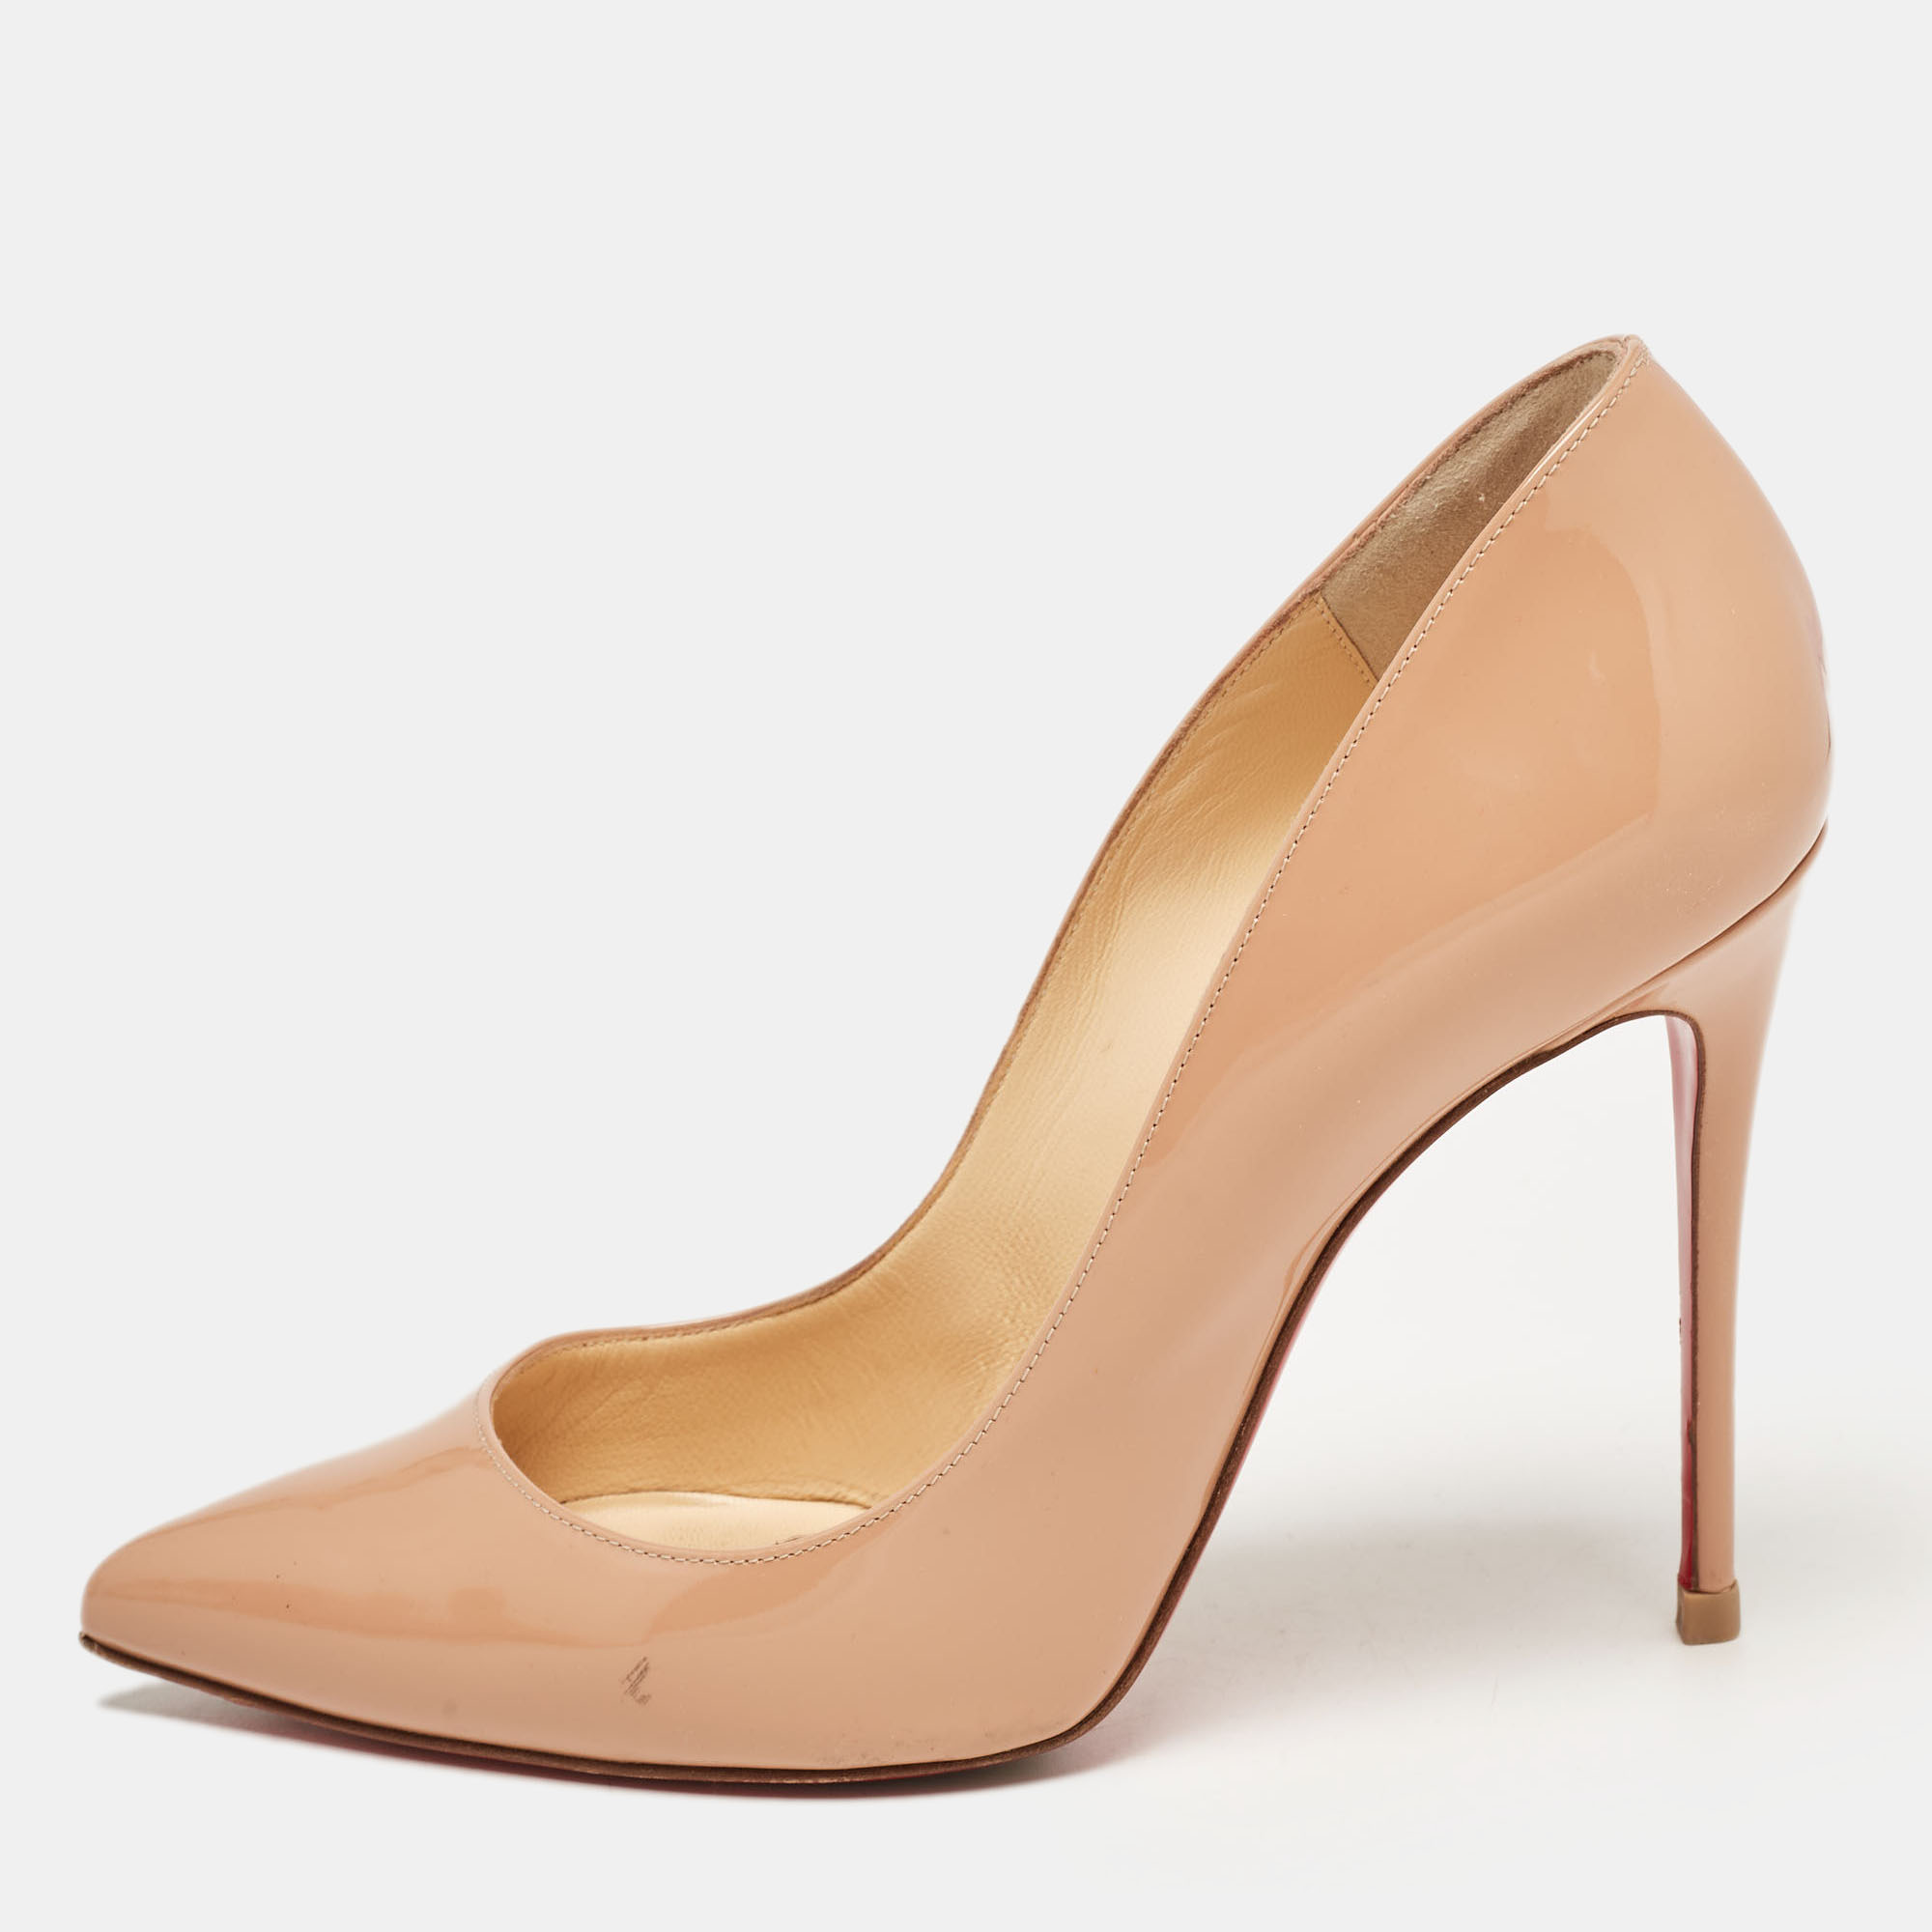 Pre-owned Christian Louboutin Beige Patent So Kate Pumps Size 38